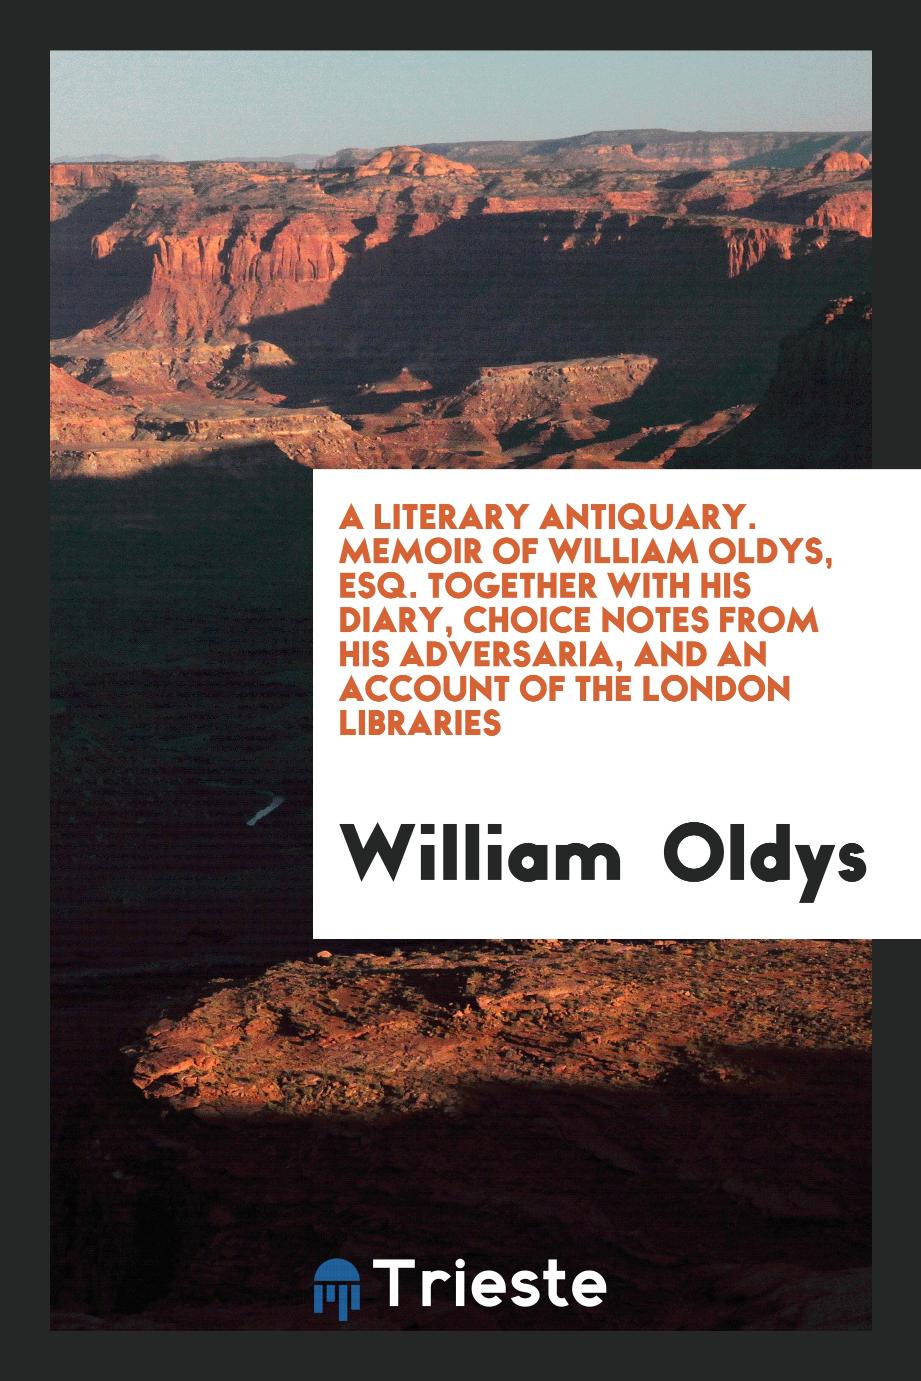 A Literary Antiquary. Memoir of William Oldys, ESQ. Together with His Diary, Choice Notes from His Adversaria, and an Account of the London Libraries